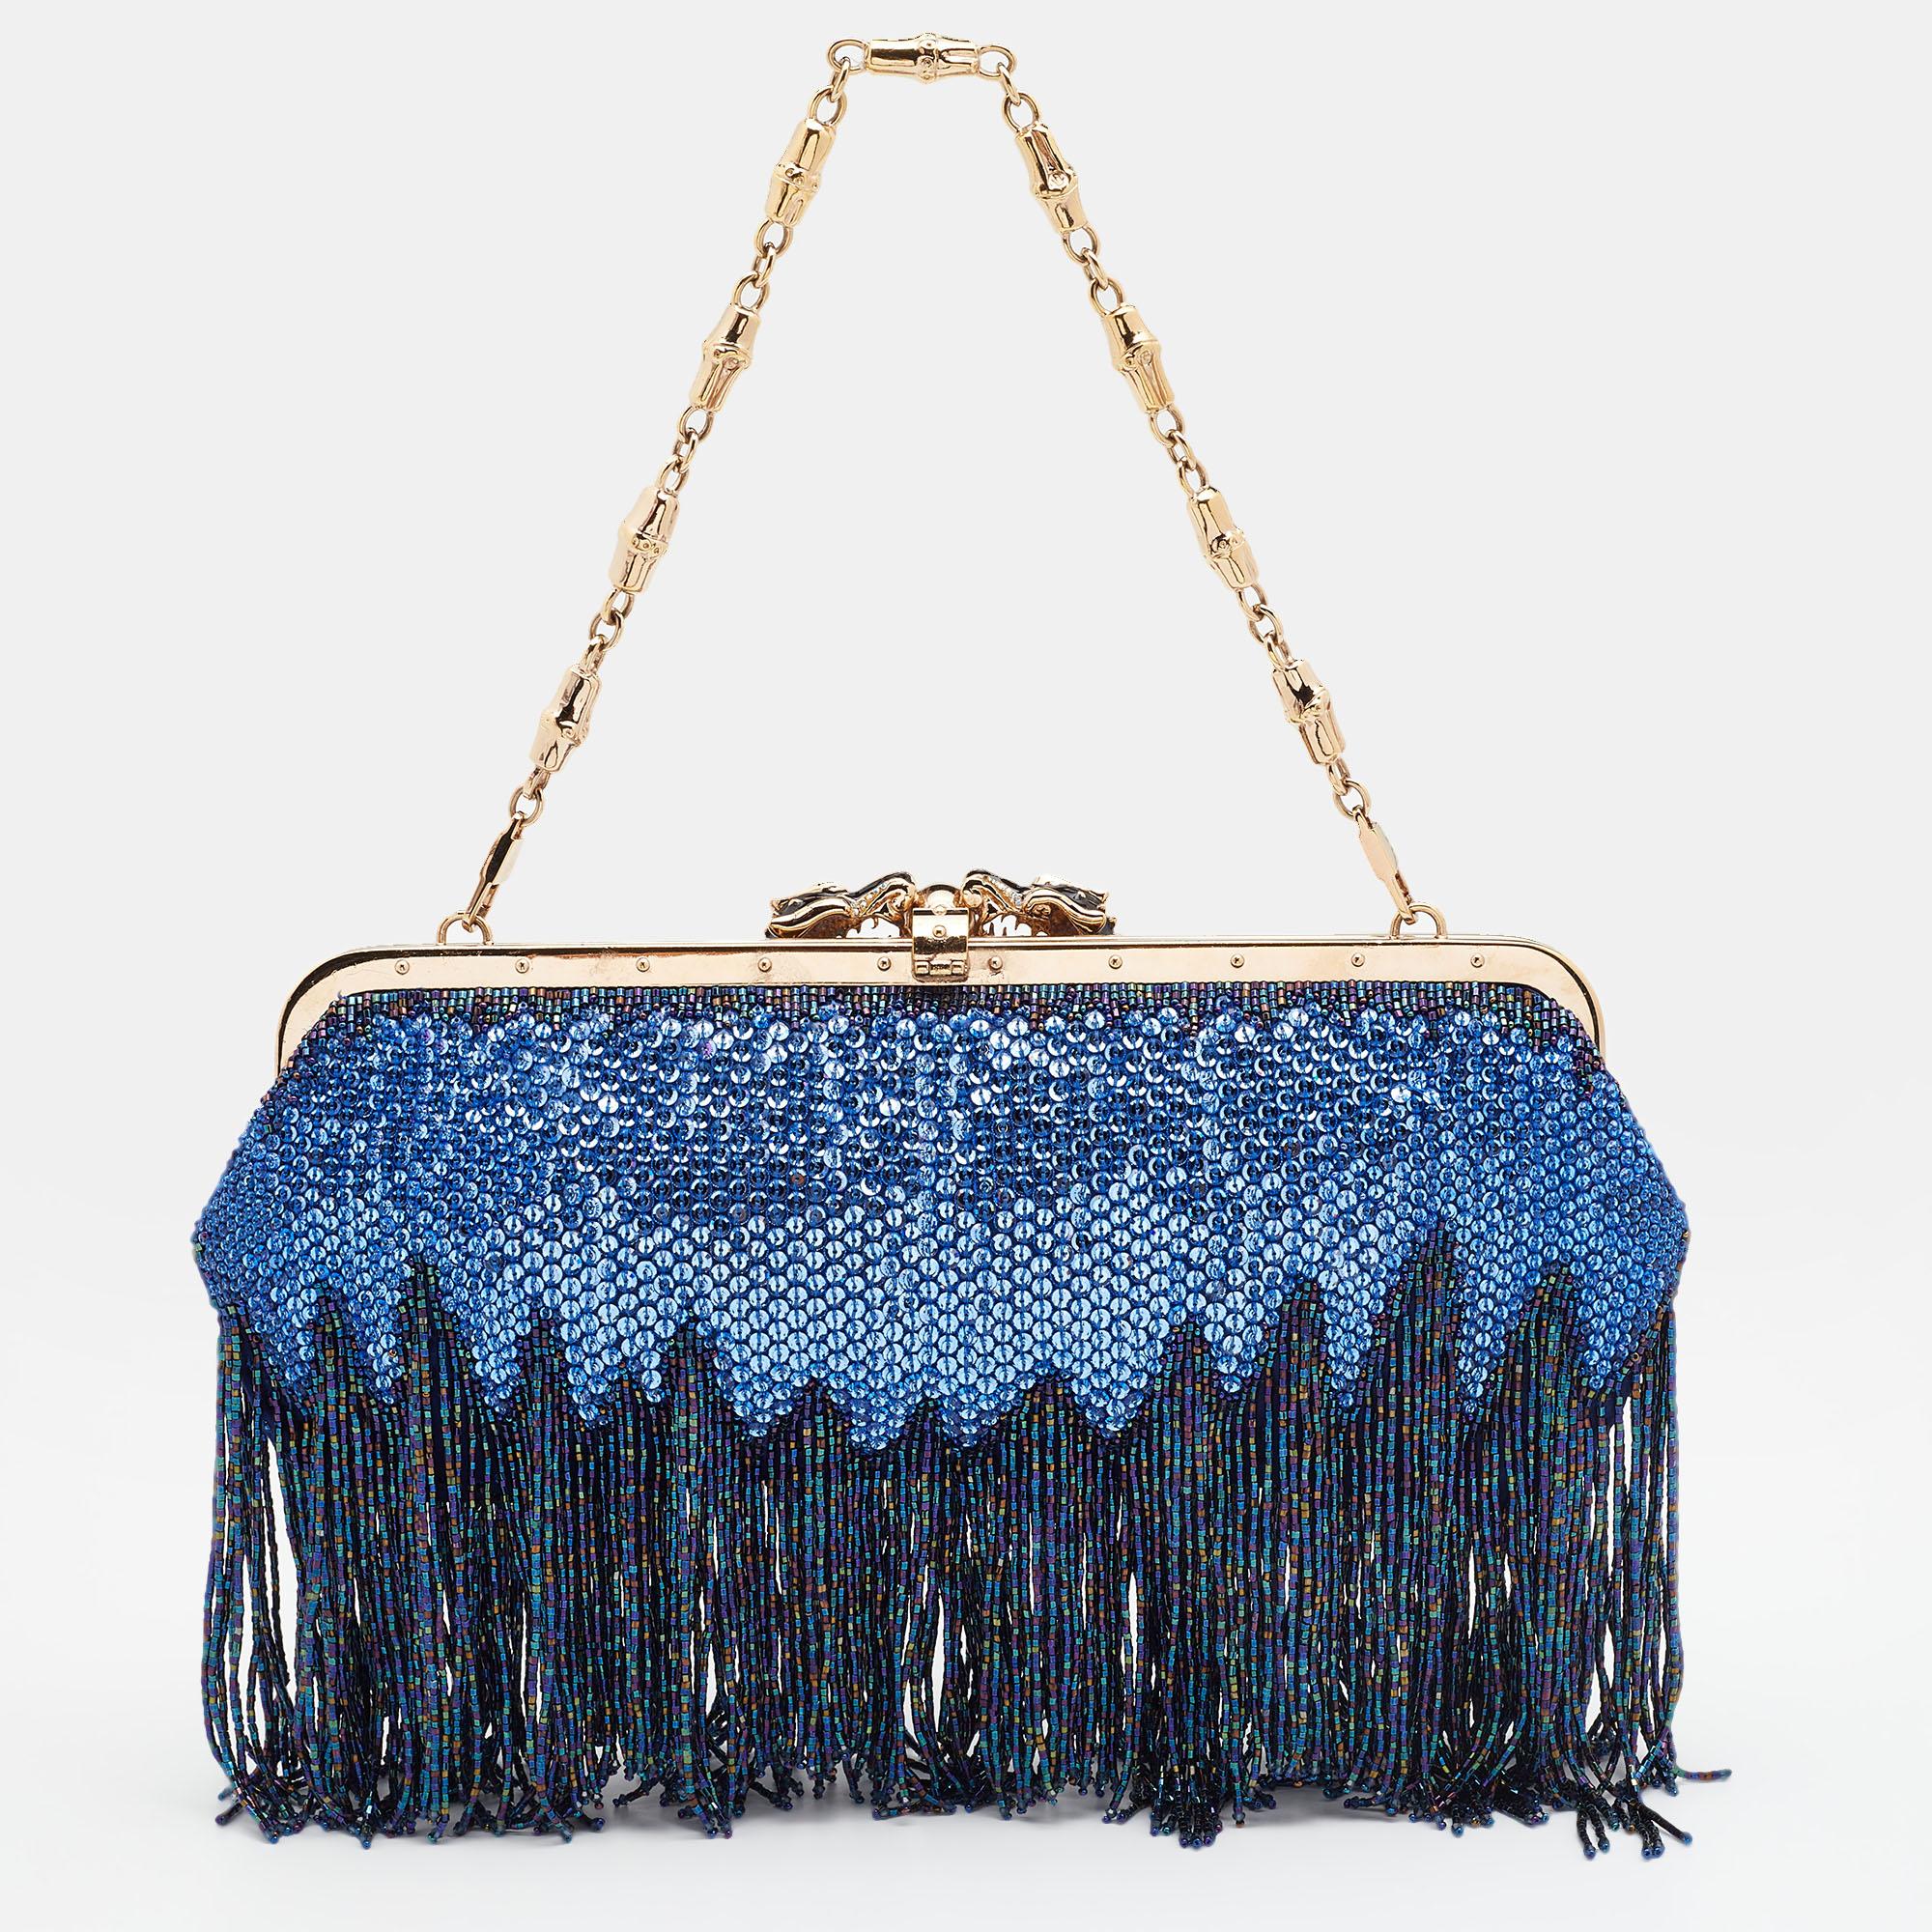 Sequins are carefully sewn all over the exterior, bead fringes are left to dangle from the base, and a dual-dragon accent graces the front — there's nothing we don't love about this Gucci evening bag. It has a gold-tone frame top giving it structure